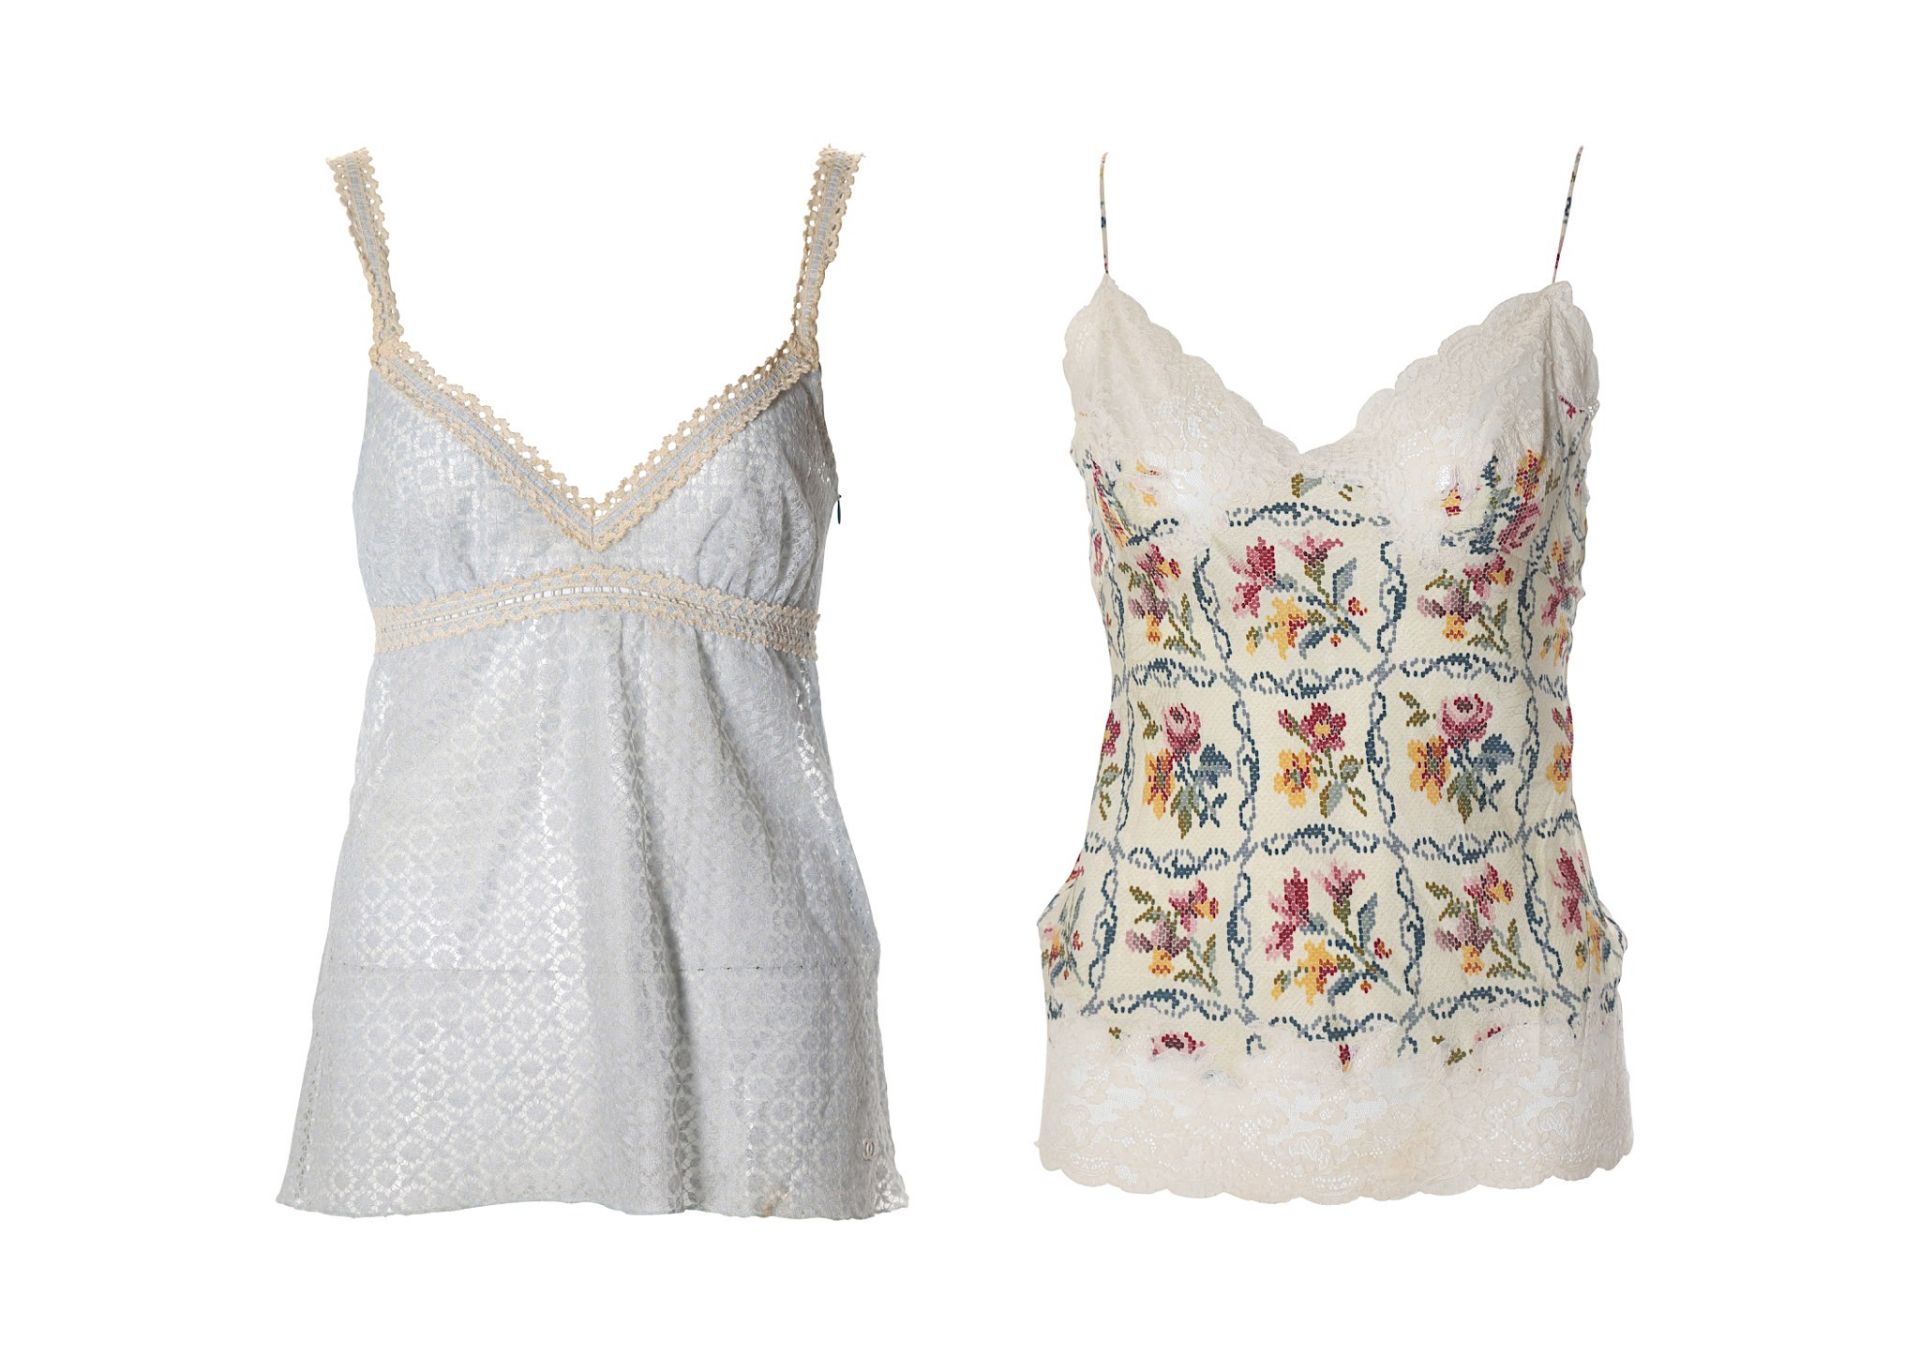 Chanel Baby Blue Lace Top, c. 2007, sleeveless des